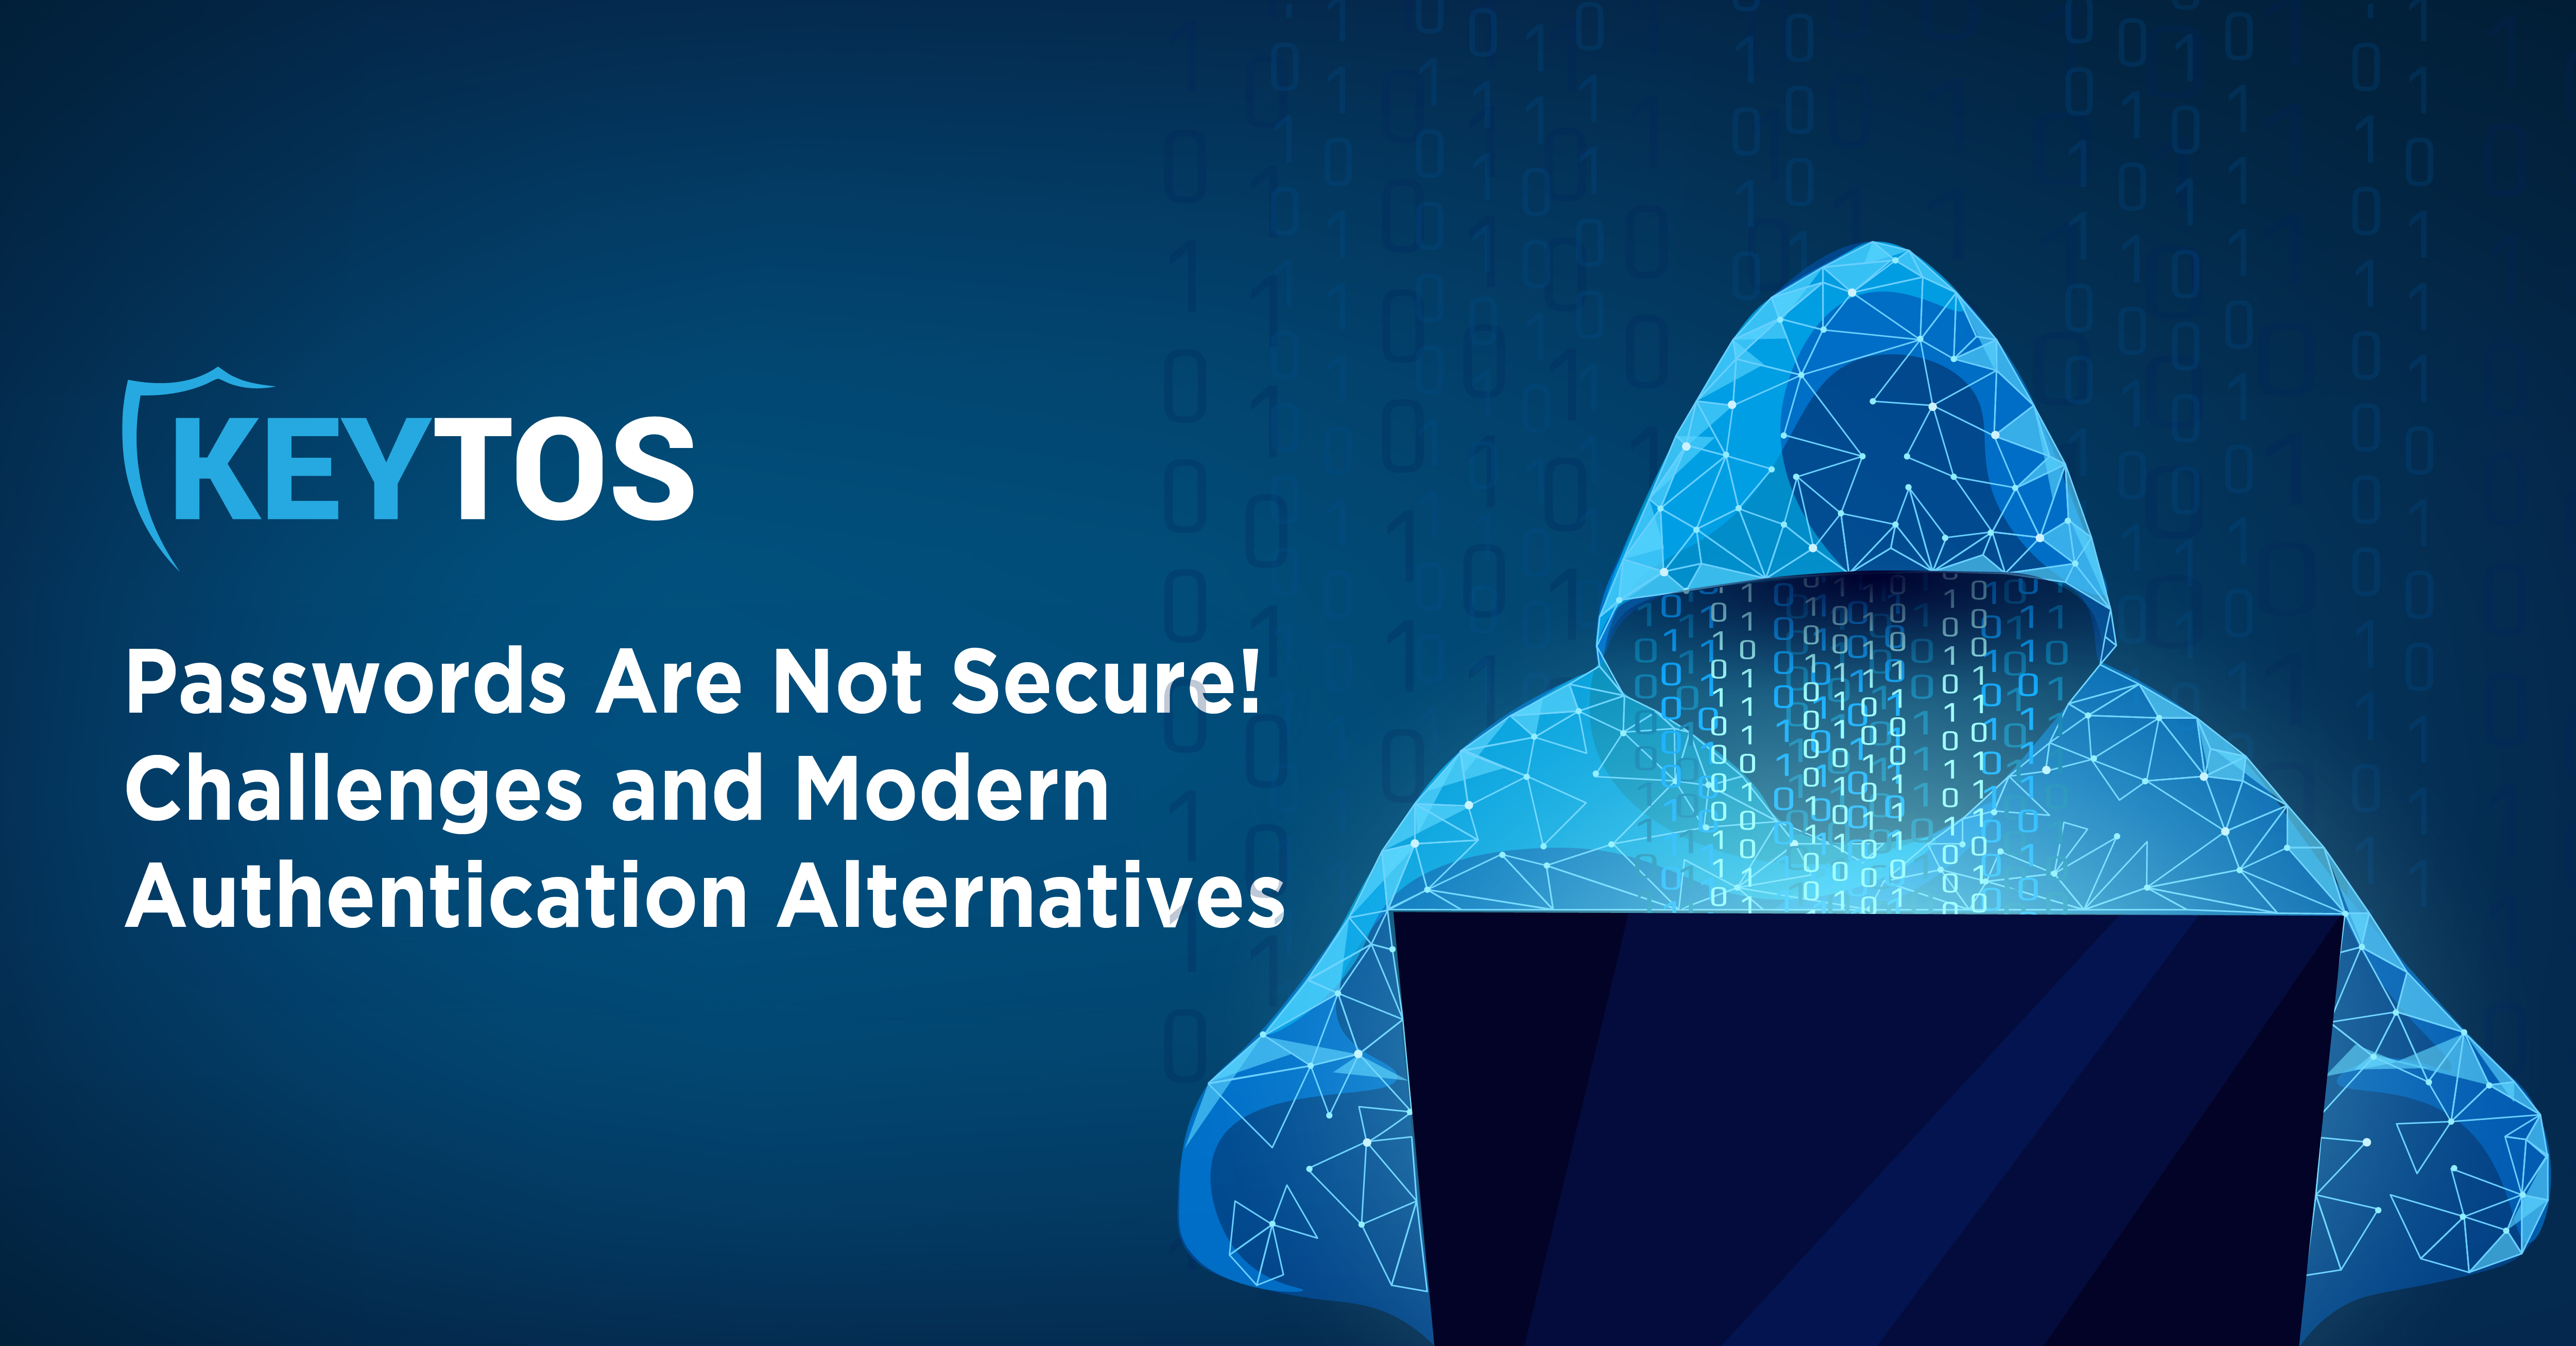 Passwords Are Not Secure! Challenges and Modern Authentication Alternatives